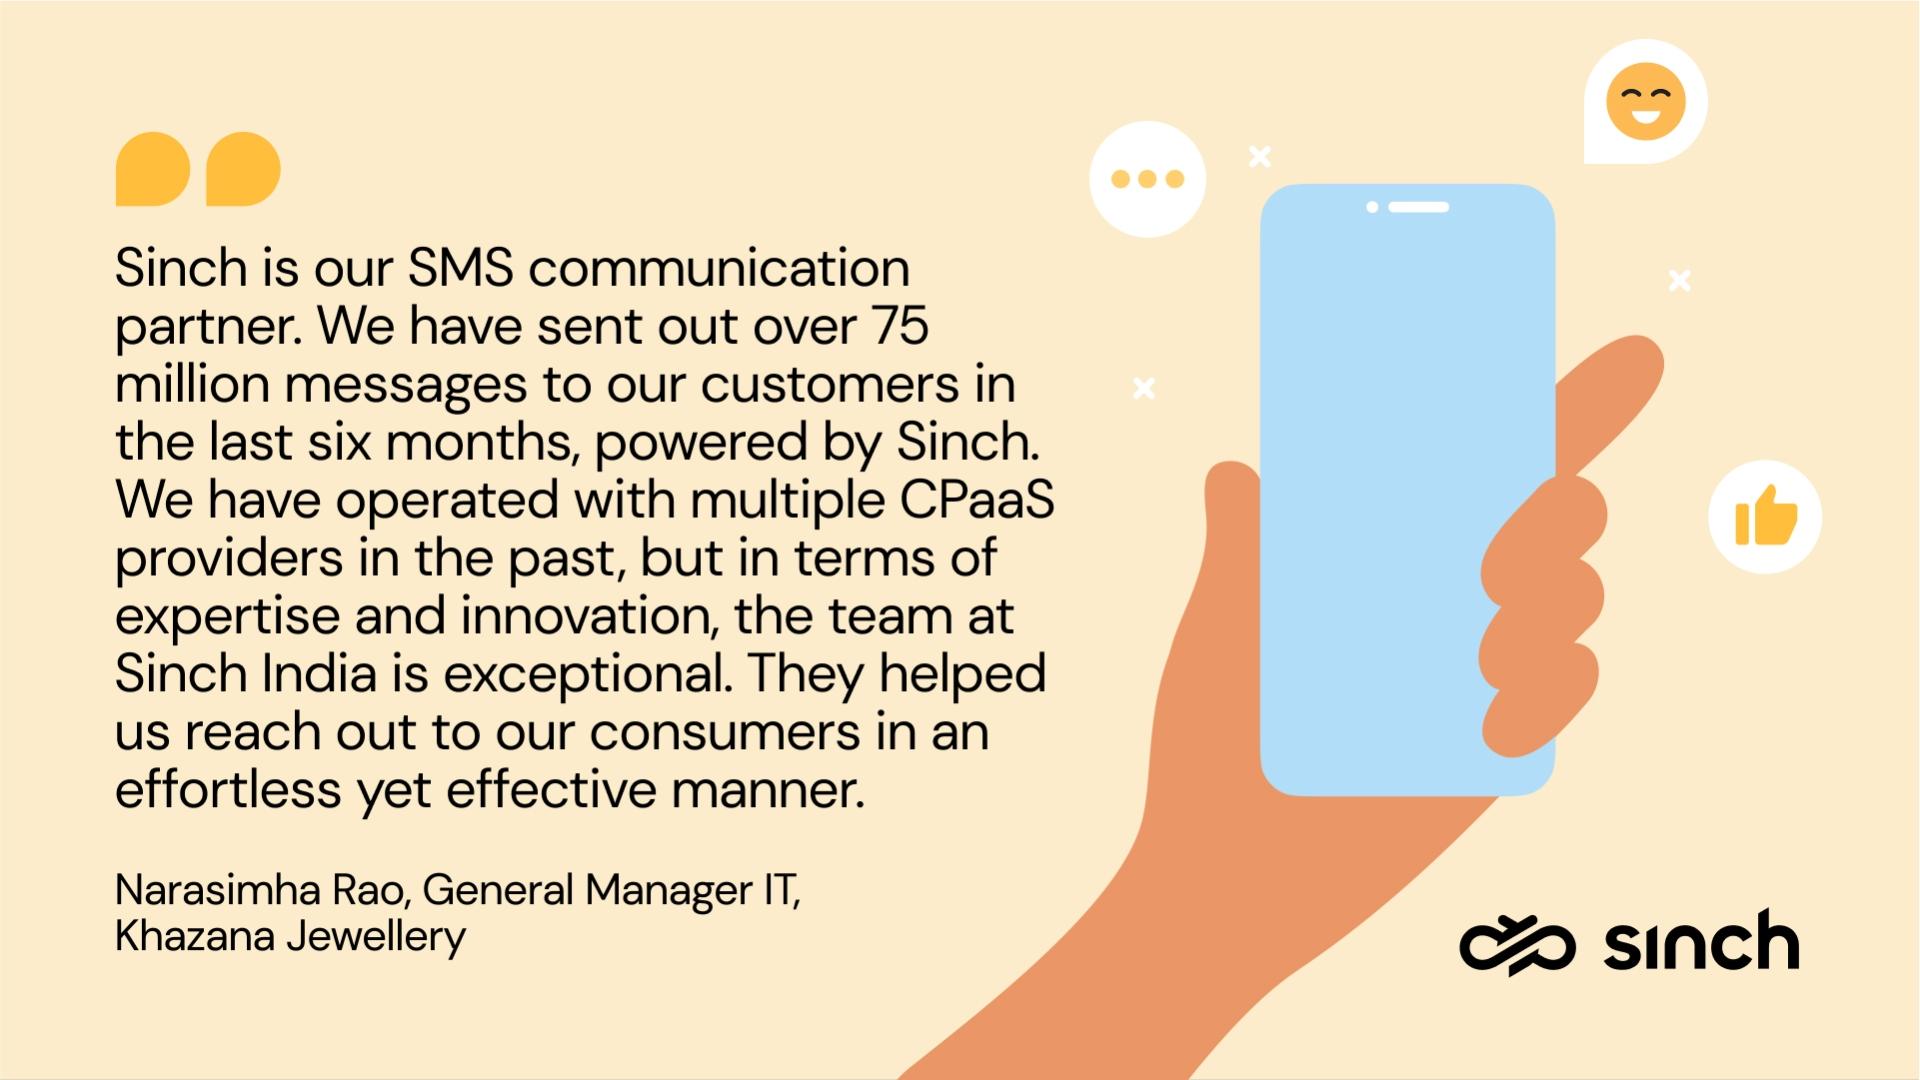 Sinch is our SMS communication partner. We have sent out over 25 million messages to our customers.